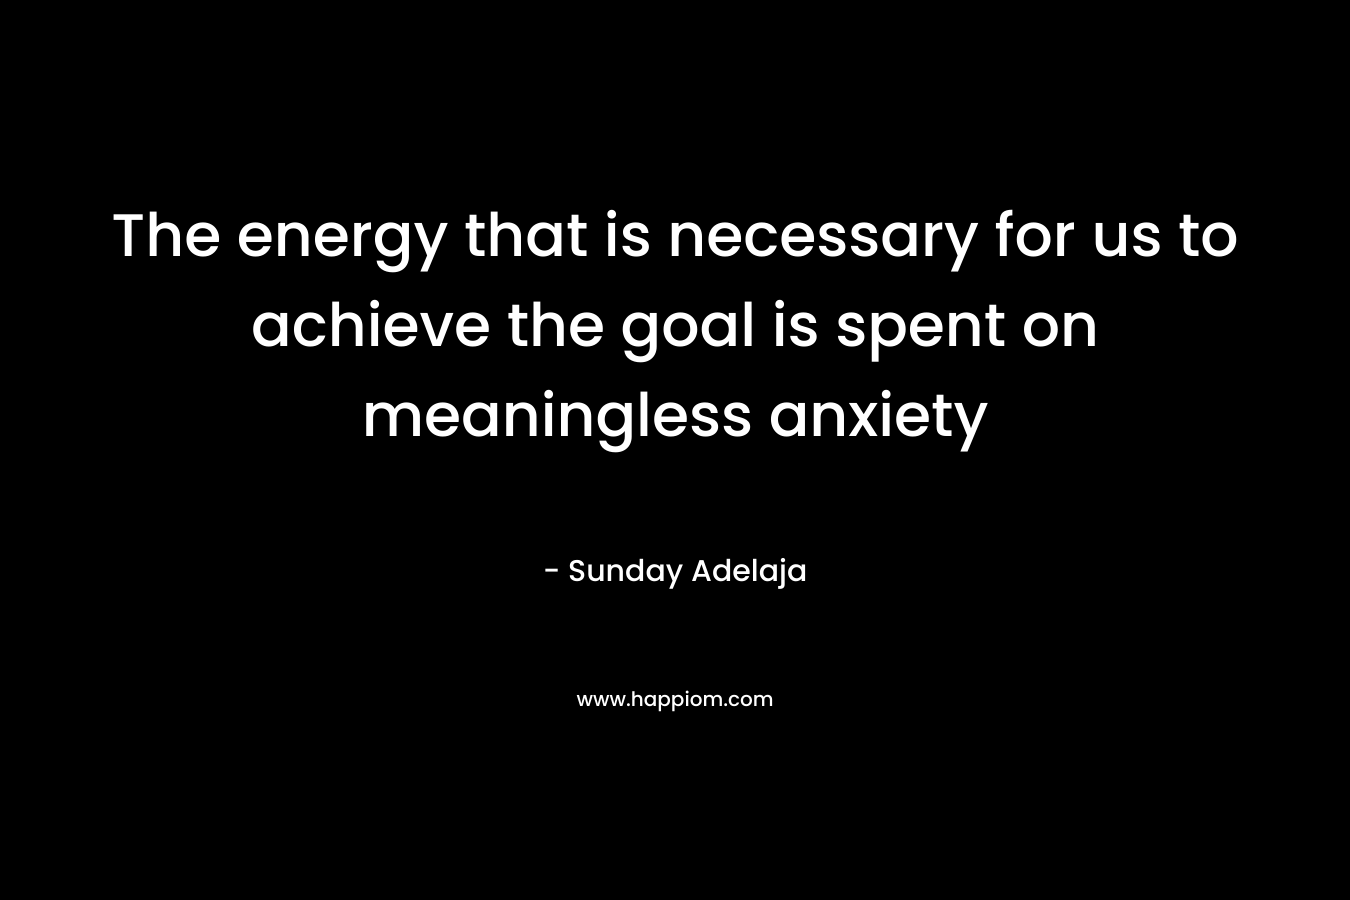 The energy that is necessary for us to achieve the goal is spent on meaningless anxiety